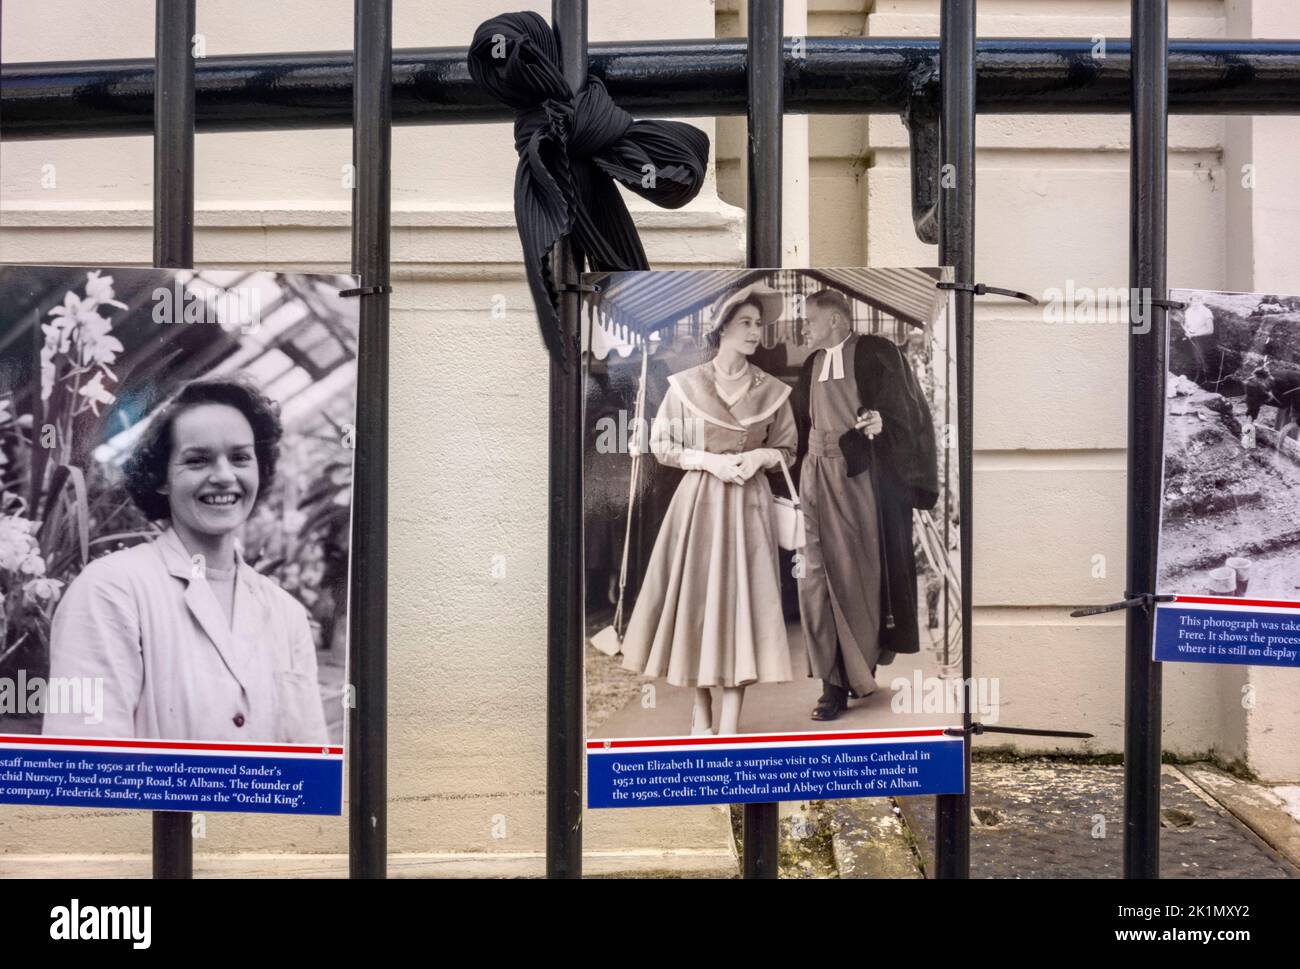 Black and White pictures of Queen Elizabeth II attached to the railings, Market Place, St. Albans, Hertfordshire as a tribute Stock Photo